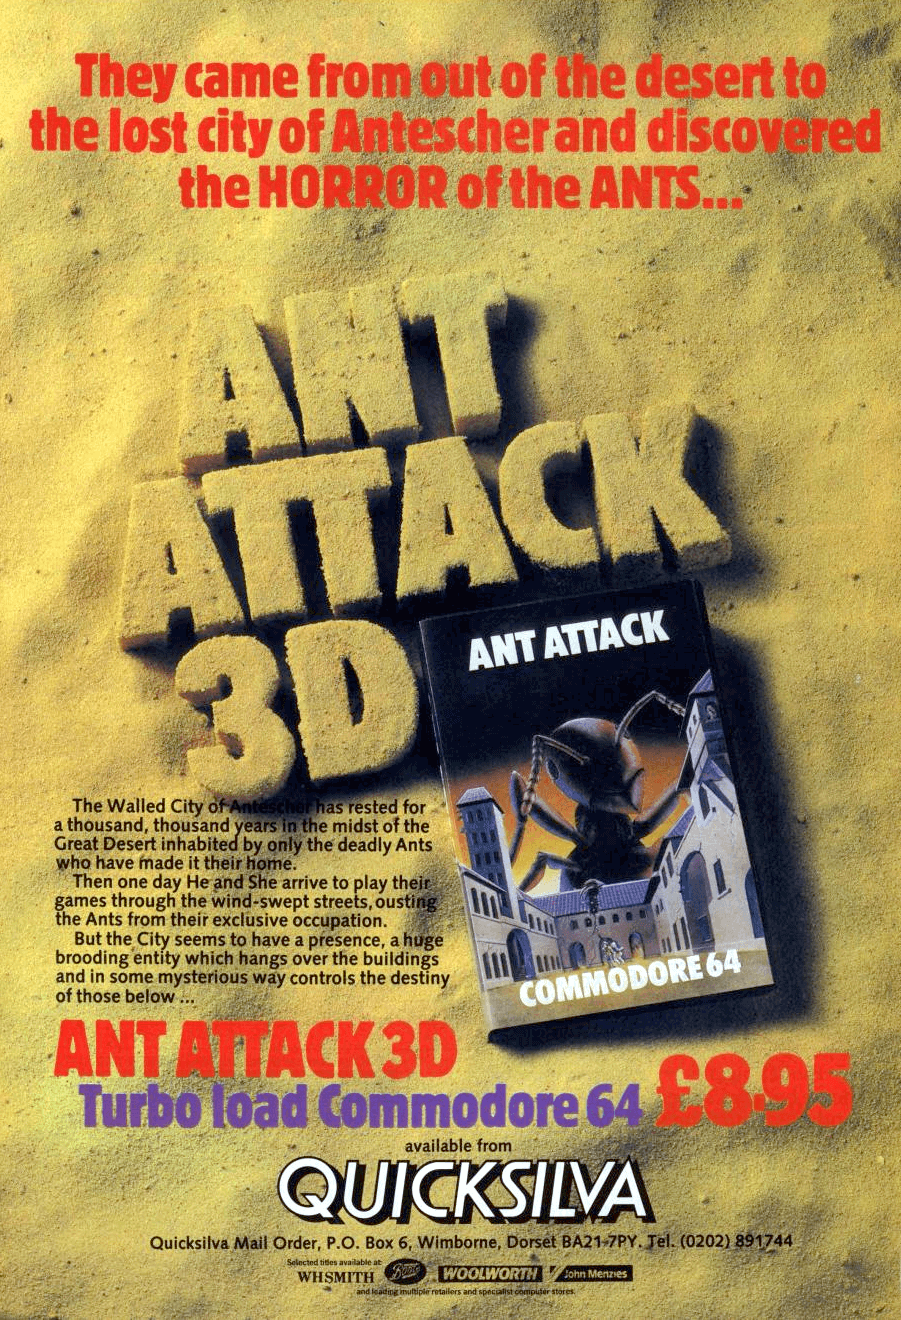 Image For Post | **Description**  
Ant Attack is an action game which innovated the usage of three freedom grades for an isometric perspective game. The freely explorable city, identified in the inlay blurb as Antescher, a combination of Ant and Escher, the famous visual paradox artist, is teeming with deadly giant ants. 

The player controls a boy or a girl and races around the city trying to find his/her lost half while jumping on structures to avoid the ants, or fighting the insects by either jumping on them or throwing grenades. When the hostage is found, the protagonist needs to guide him/her into safeness. Then the next round, with higher difficulty and the hostage being placed at another point, begins. The perspective can be switched to four 90° turned views.

While both Q*bert and Zaxxon previously used isometric projection, Ant Attack added an extra degree of freedom (ability to go up and down instead of just north, south, east and west), and it may be the first isometric game for personal computers. 

The author argued that it "was the first true isometric 3D game". The same type of isometric projection was used in Sandy White's later Zombie Zombie. It was also one of the first games to allow players to choose their gender.

**Alternate Titles**  
    "Soft Solid 3D Ant Attack" -- Common intepretation of title
    "Hormigas" -- Spanish title